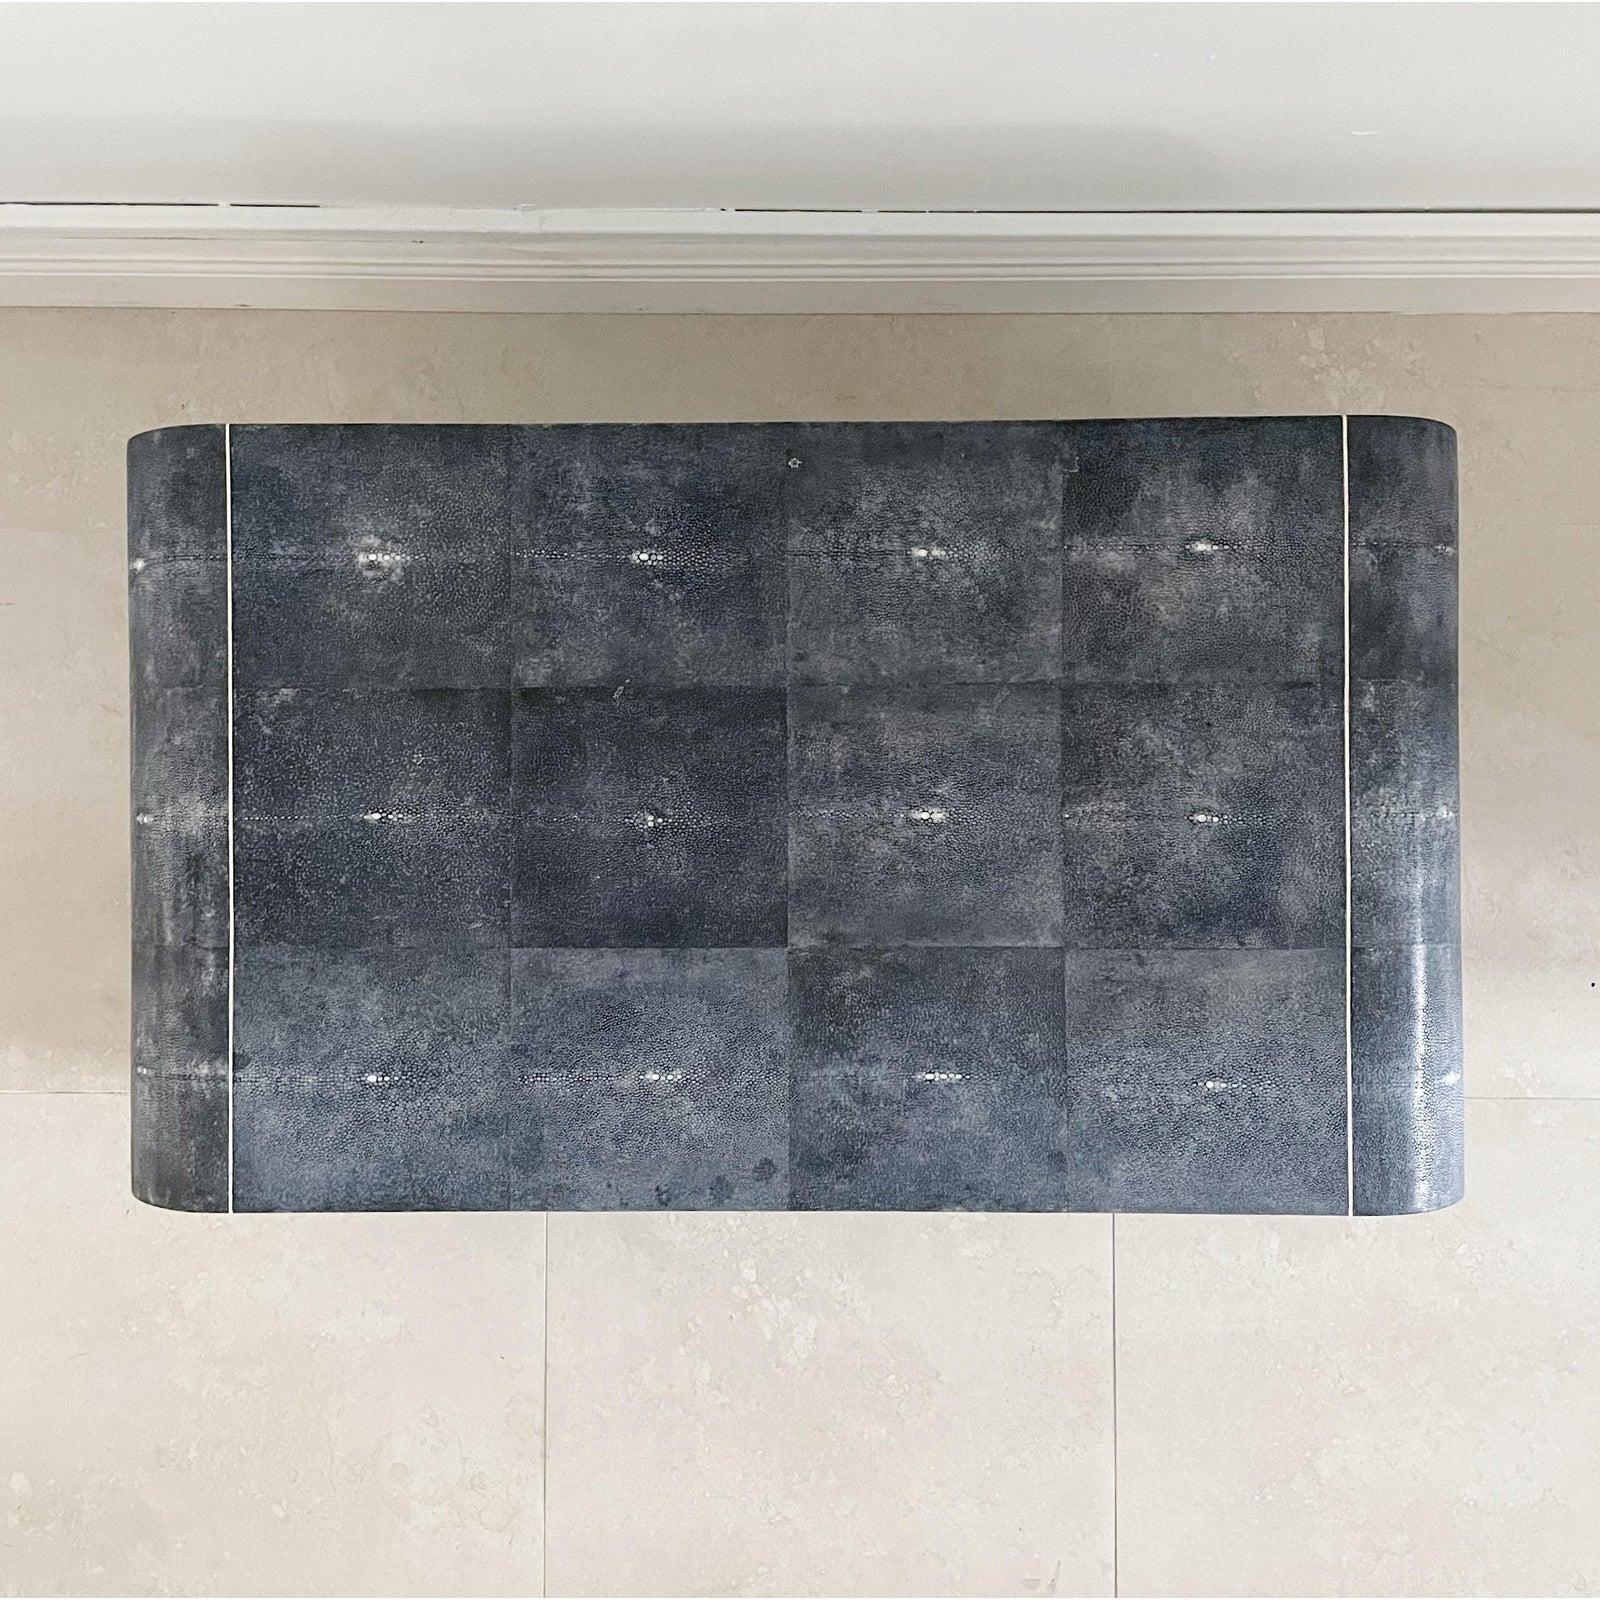 Waterfall coffee table in natural shagreen with ivorine inlay by Karl Springer, Karl Springer LTD. The color is a charcoal grey with a slight blue hue. Signed on metal plaque on underside.